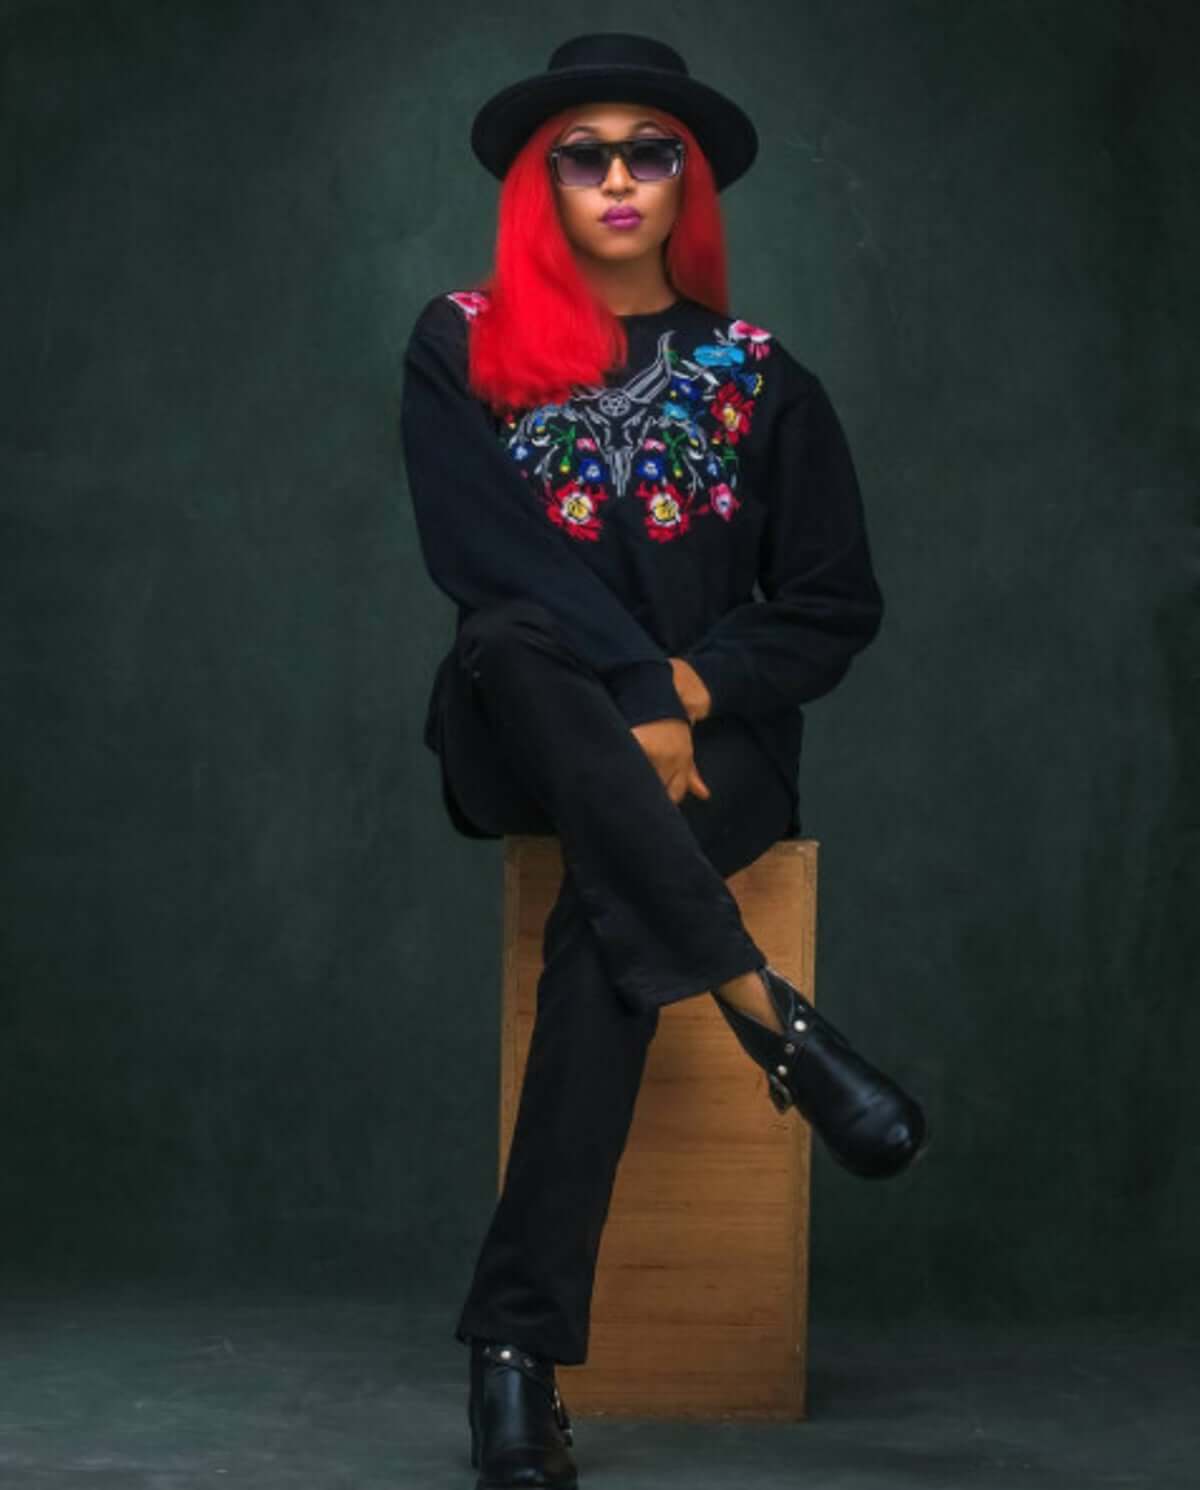 Cynthia Madrina Cynthia Morgan Biography: Early life, music career, awards, net worth and legal issues.